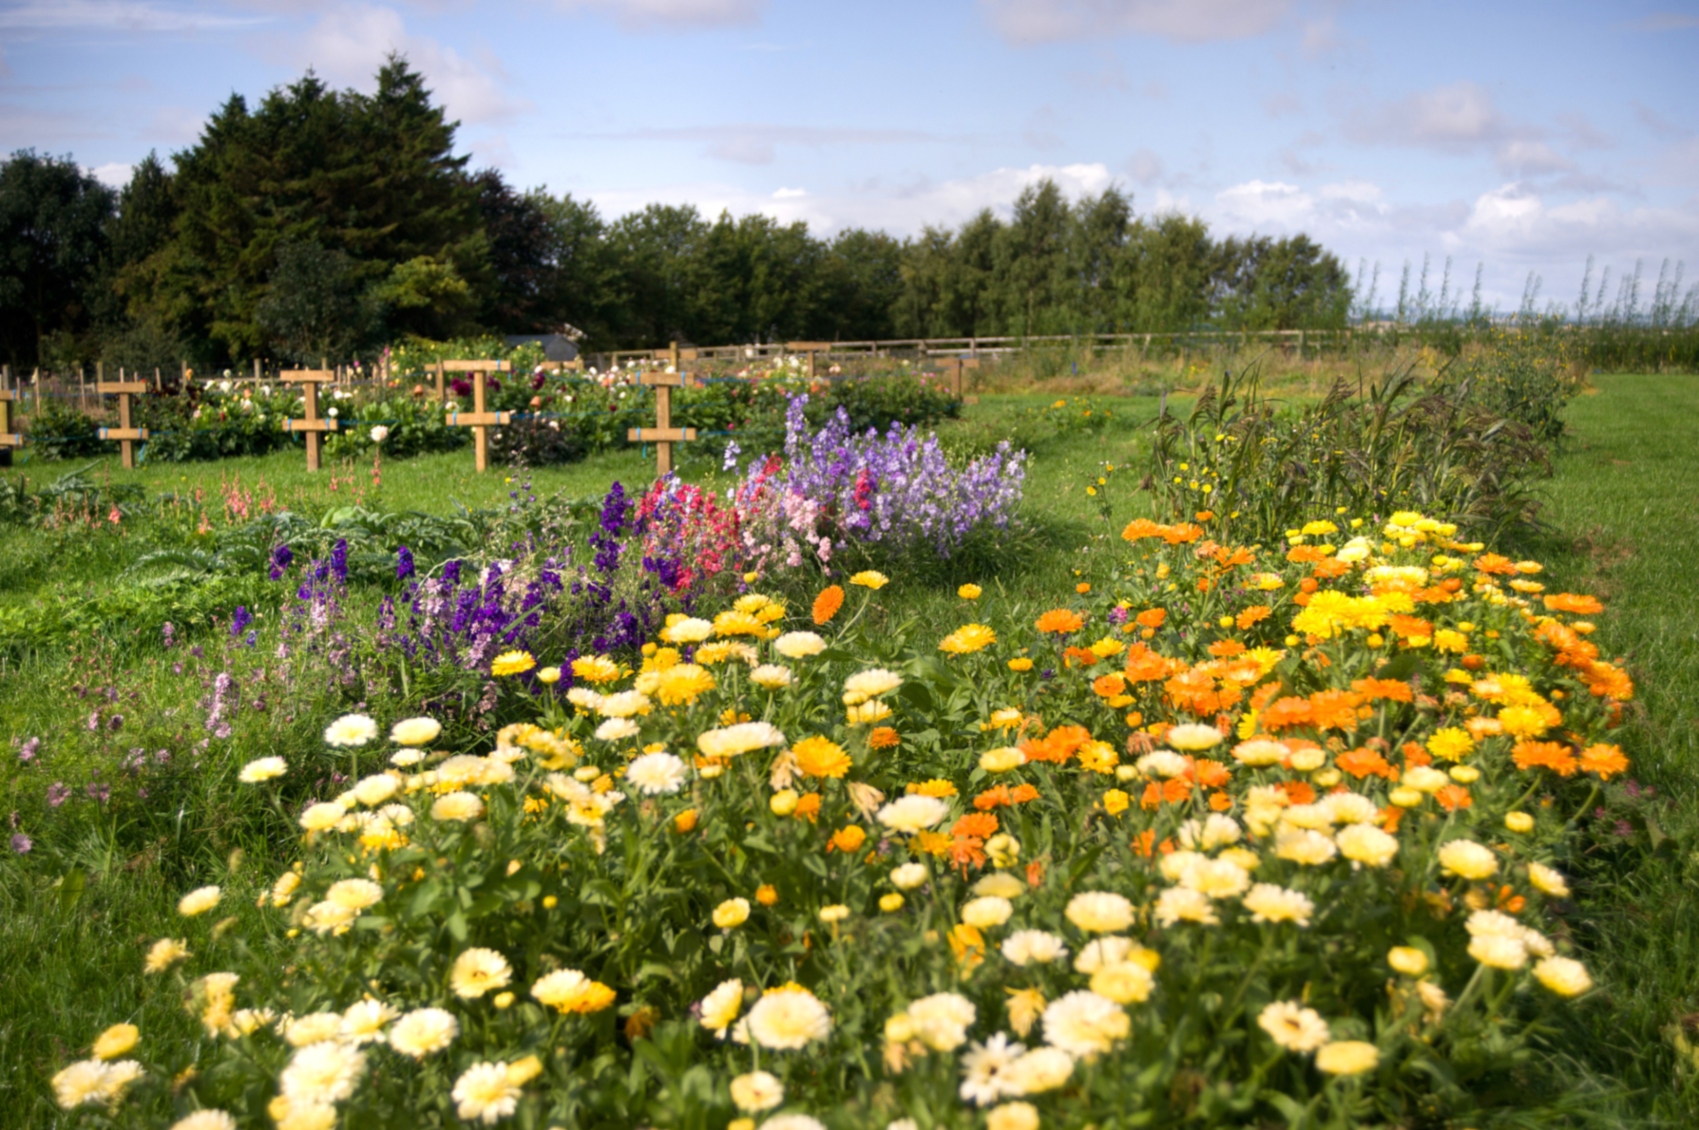 The flower fields in the English countryside at Ginger House Garden in Northumberland, England.